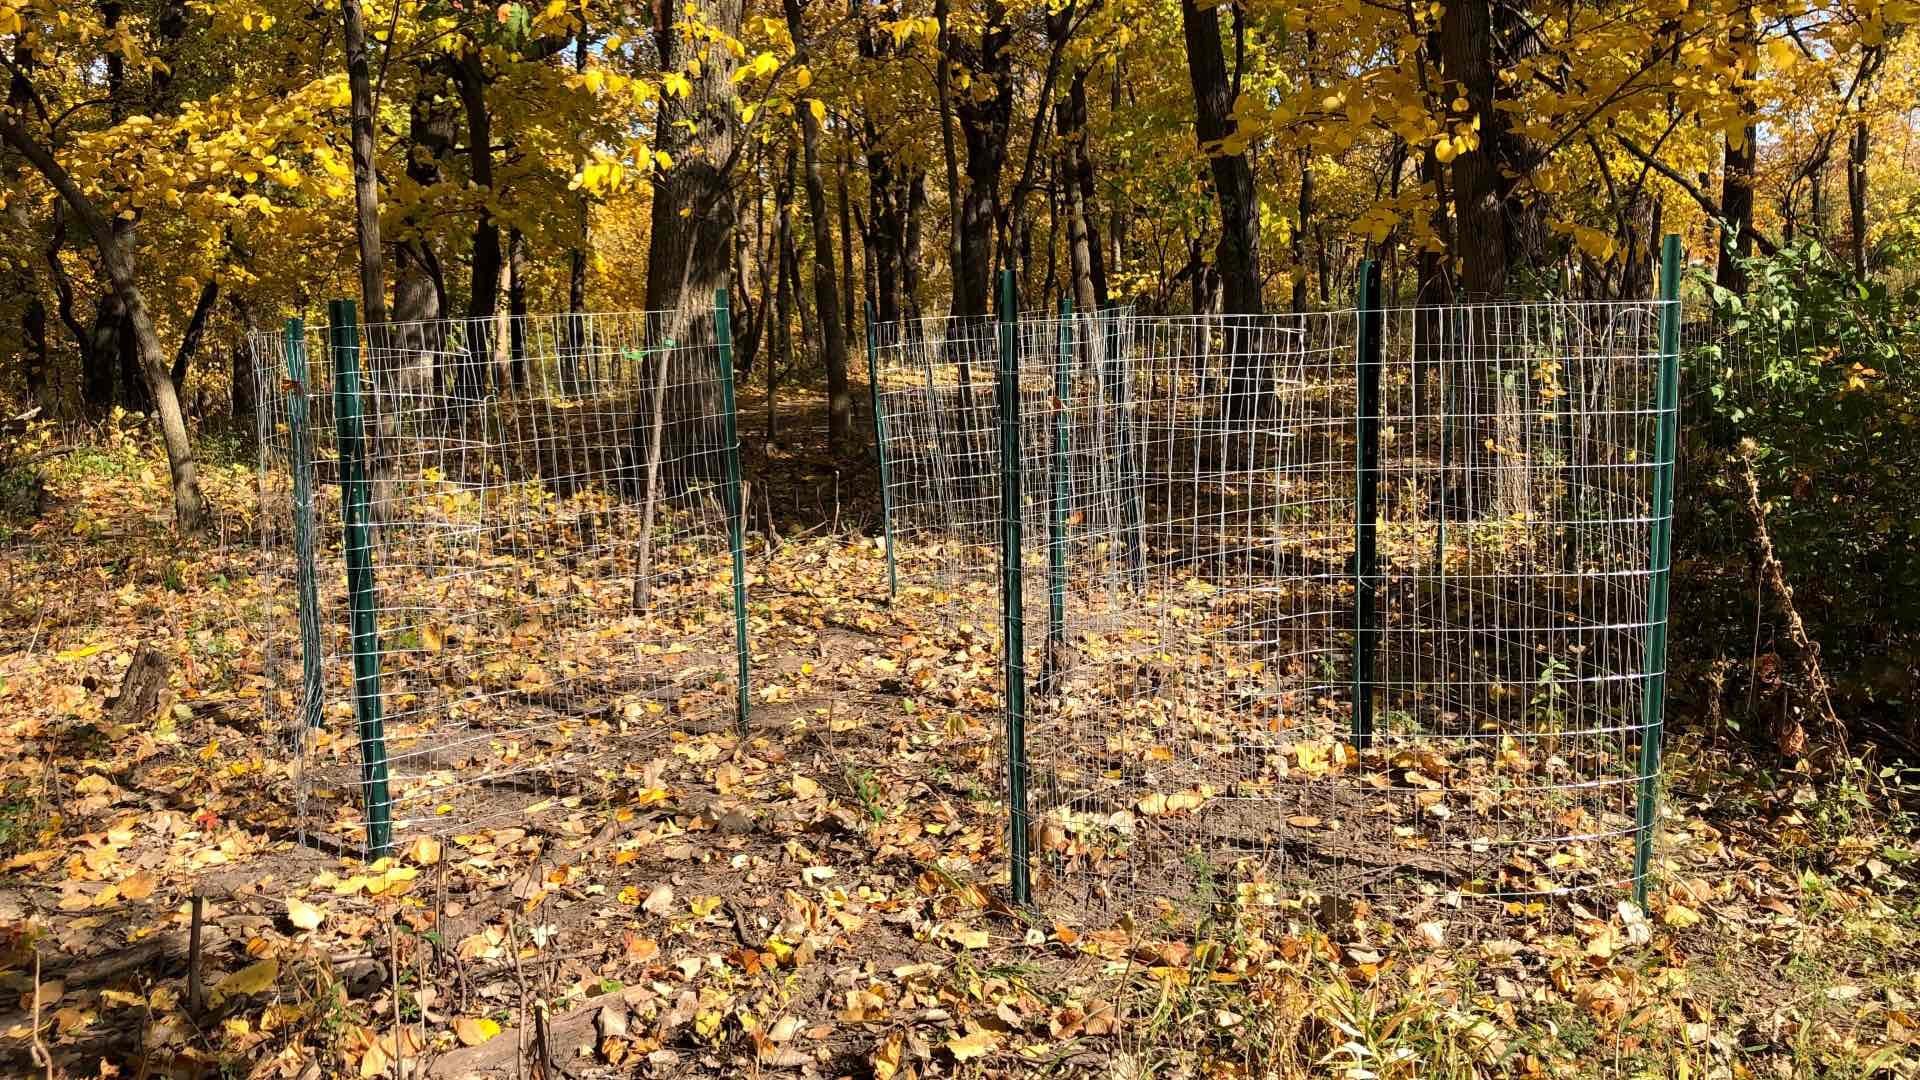 Protective fencing, like these cages pictured Oct. 23, 2022, at LaBagh Woods, is needed to protect native shrubs from grazing by deer. (Patty Wetli / WTTW News)